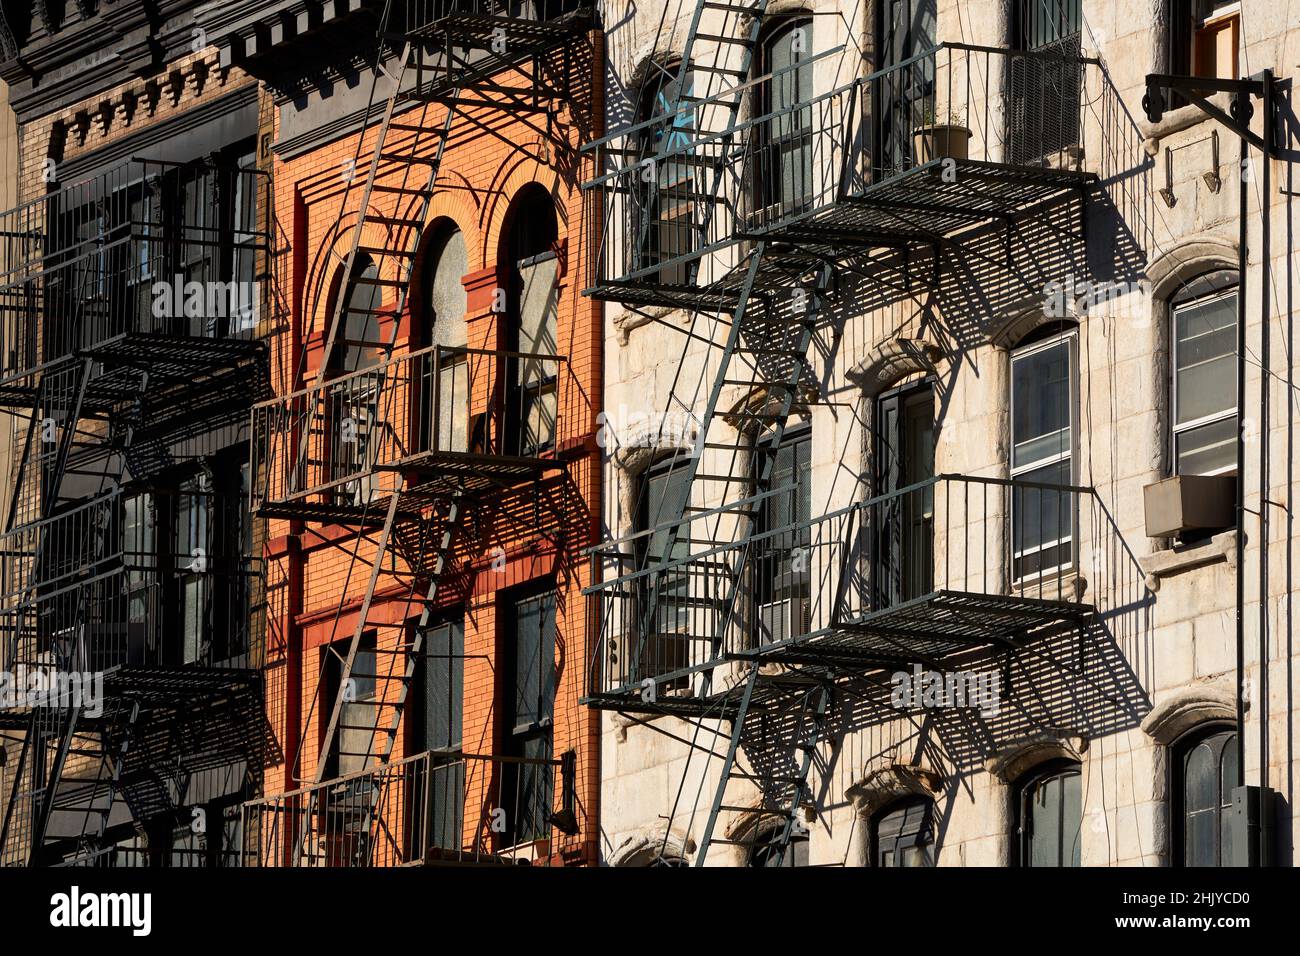 Typical Soho loft building facades with fire escapes and red bricks. Manhattan, New York City Stock Photo